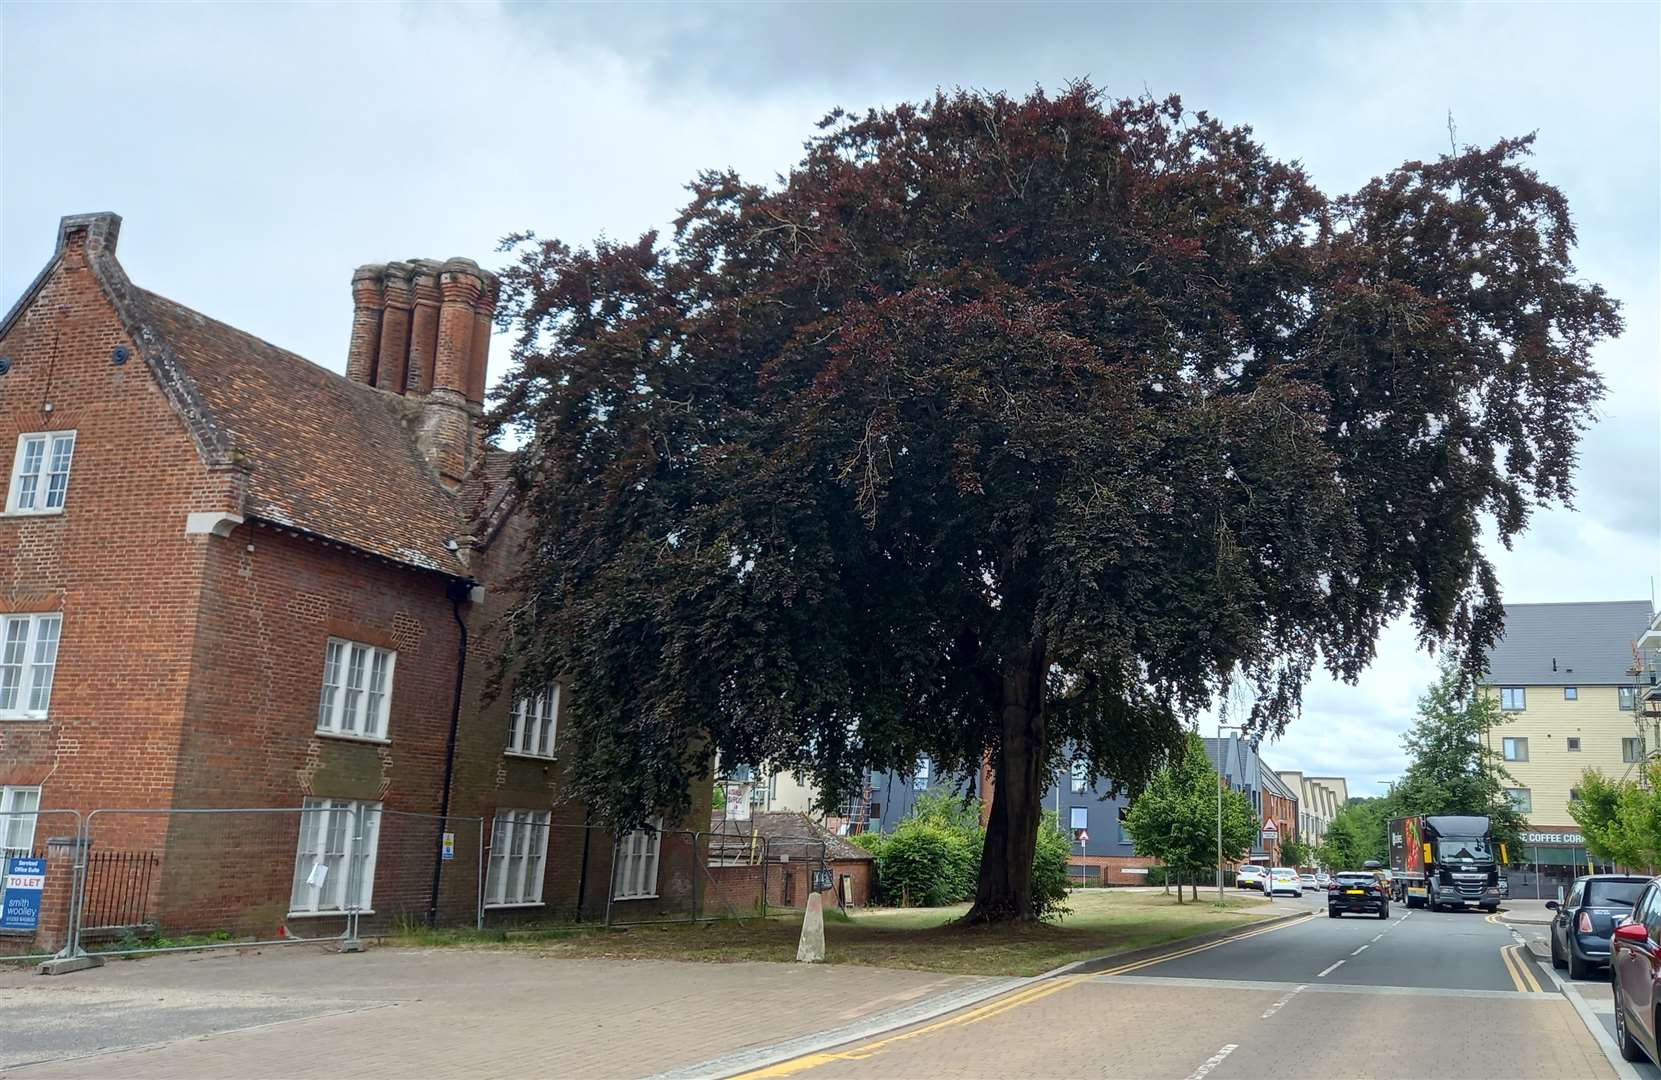 A tree which is over 100 years old has been saved from being felled in Ashford. Picture: Ashford Borough Council